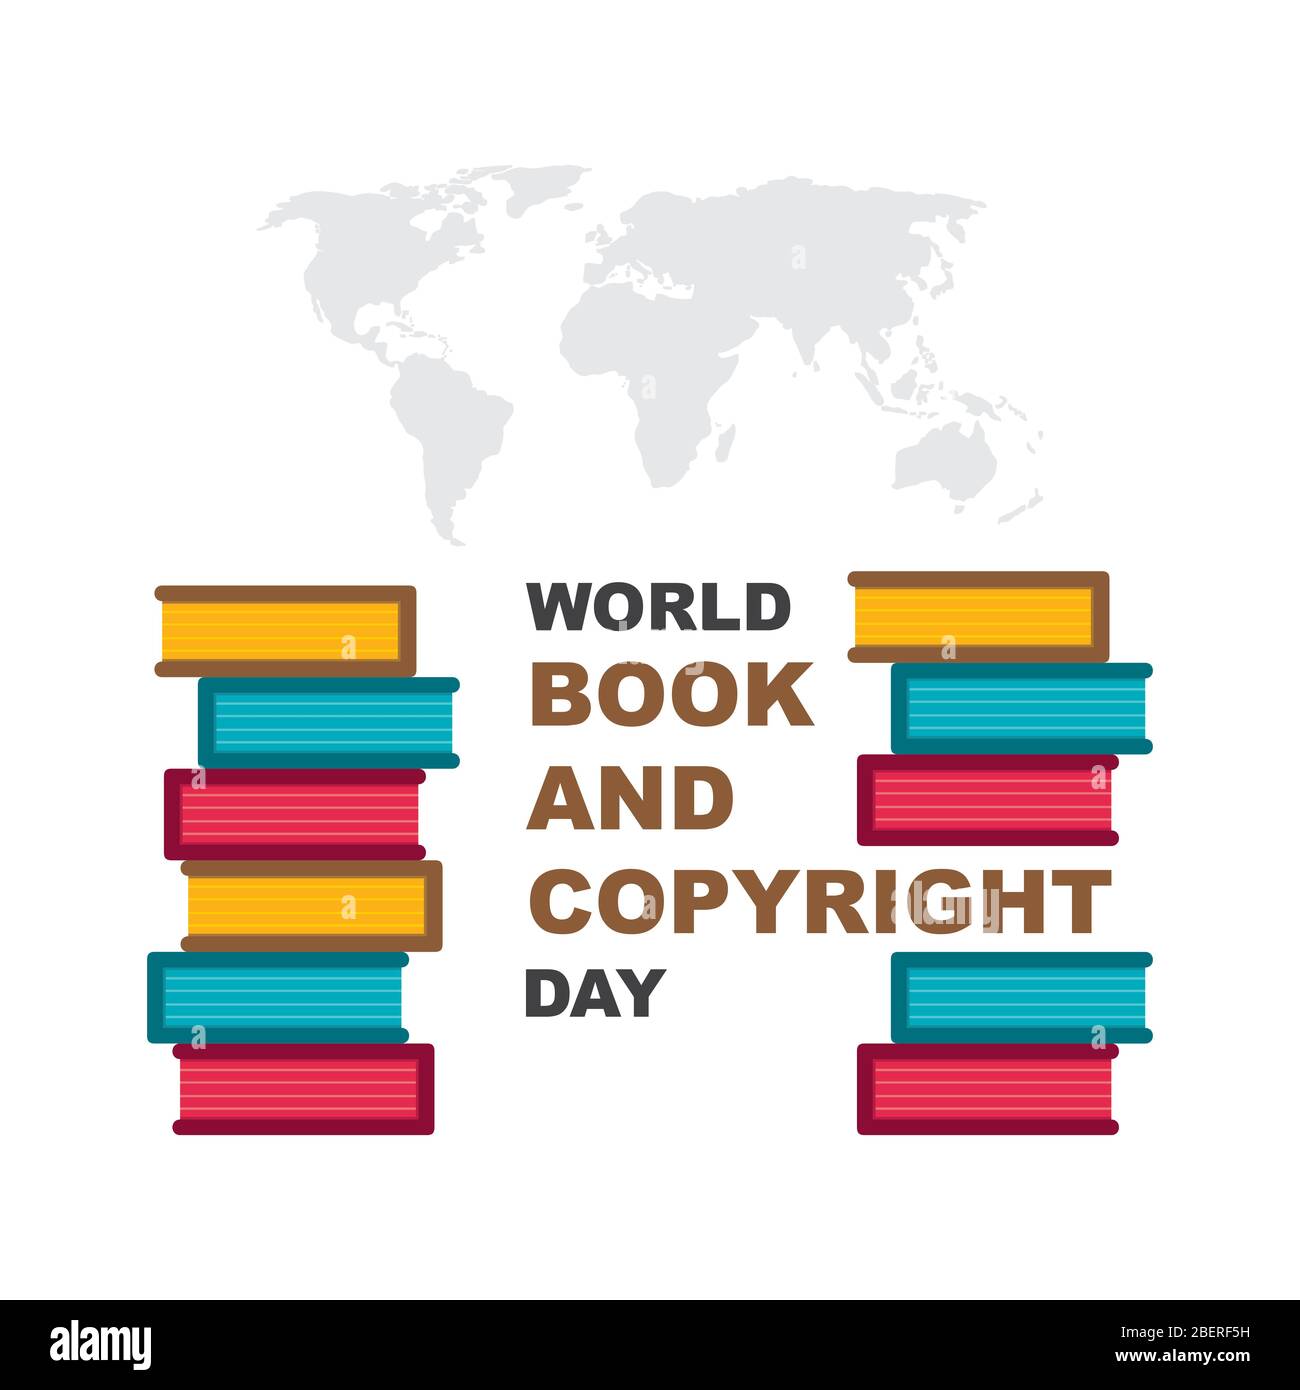 World book and copyright day illustration vector. Flat illustration of world book day with colorful book stack Stock Vector